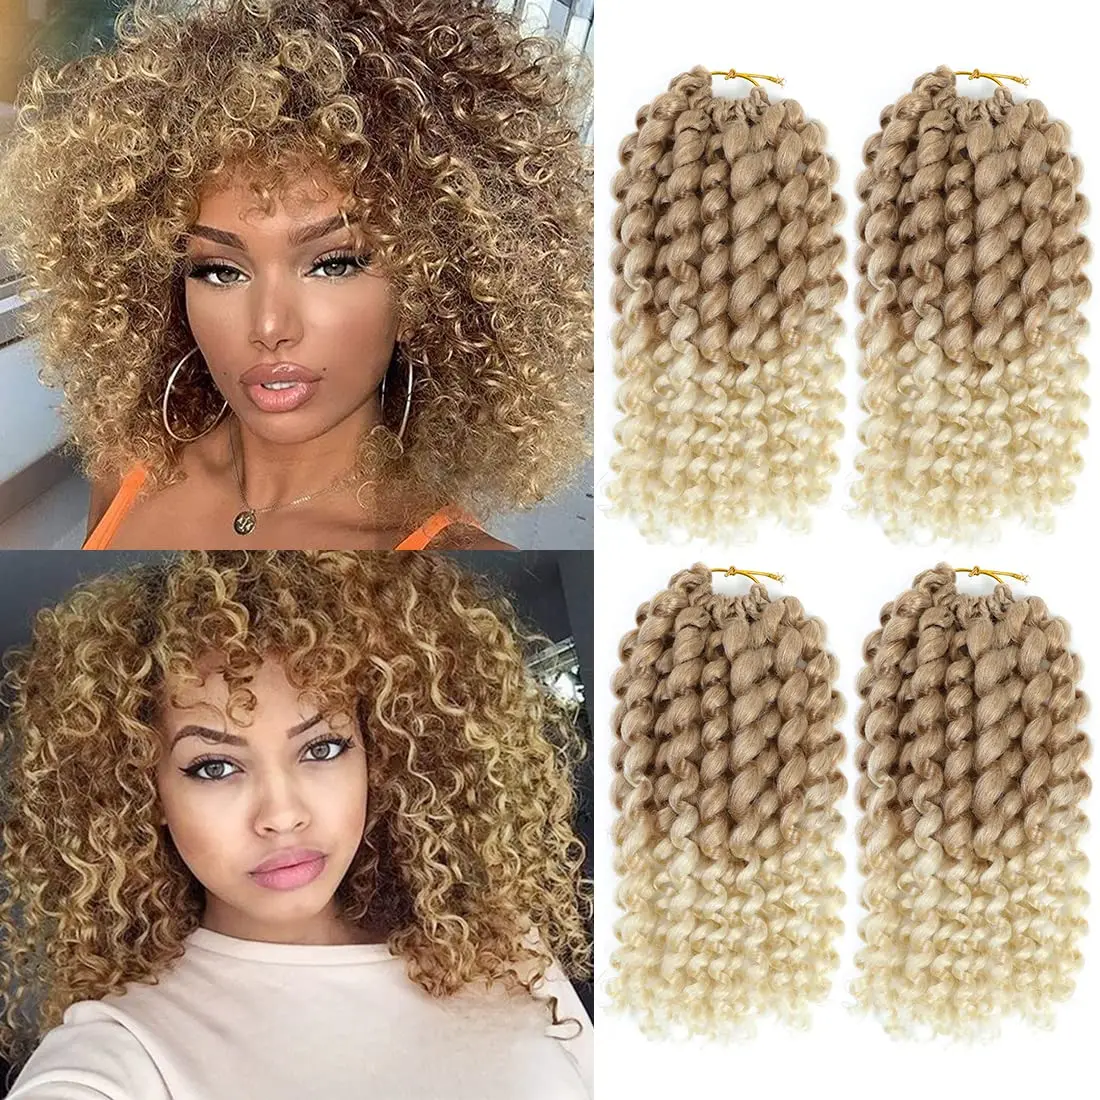 

12Inch Curly Jumpy Wand Curl Jamaican Bounce Synthetic Braiding Hair Extensions Afro Crochet Braid Hair For Black Women